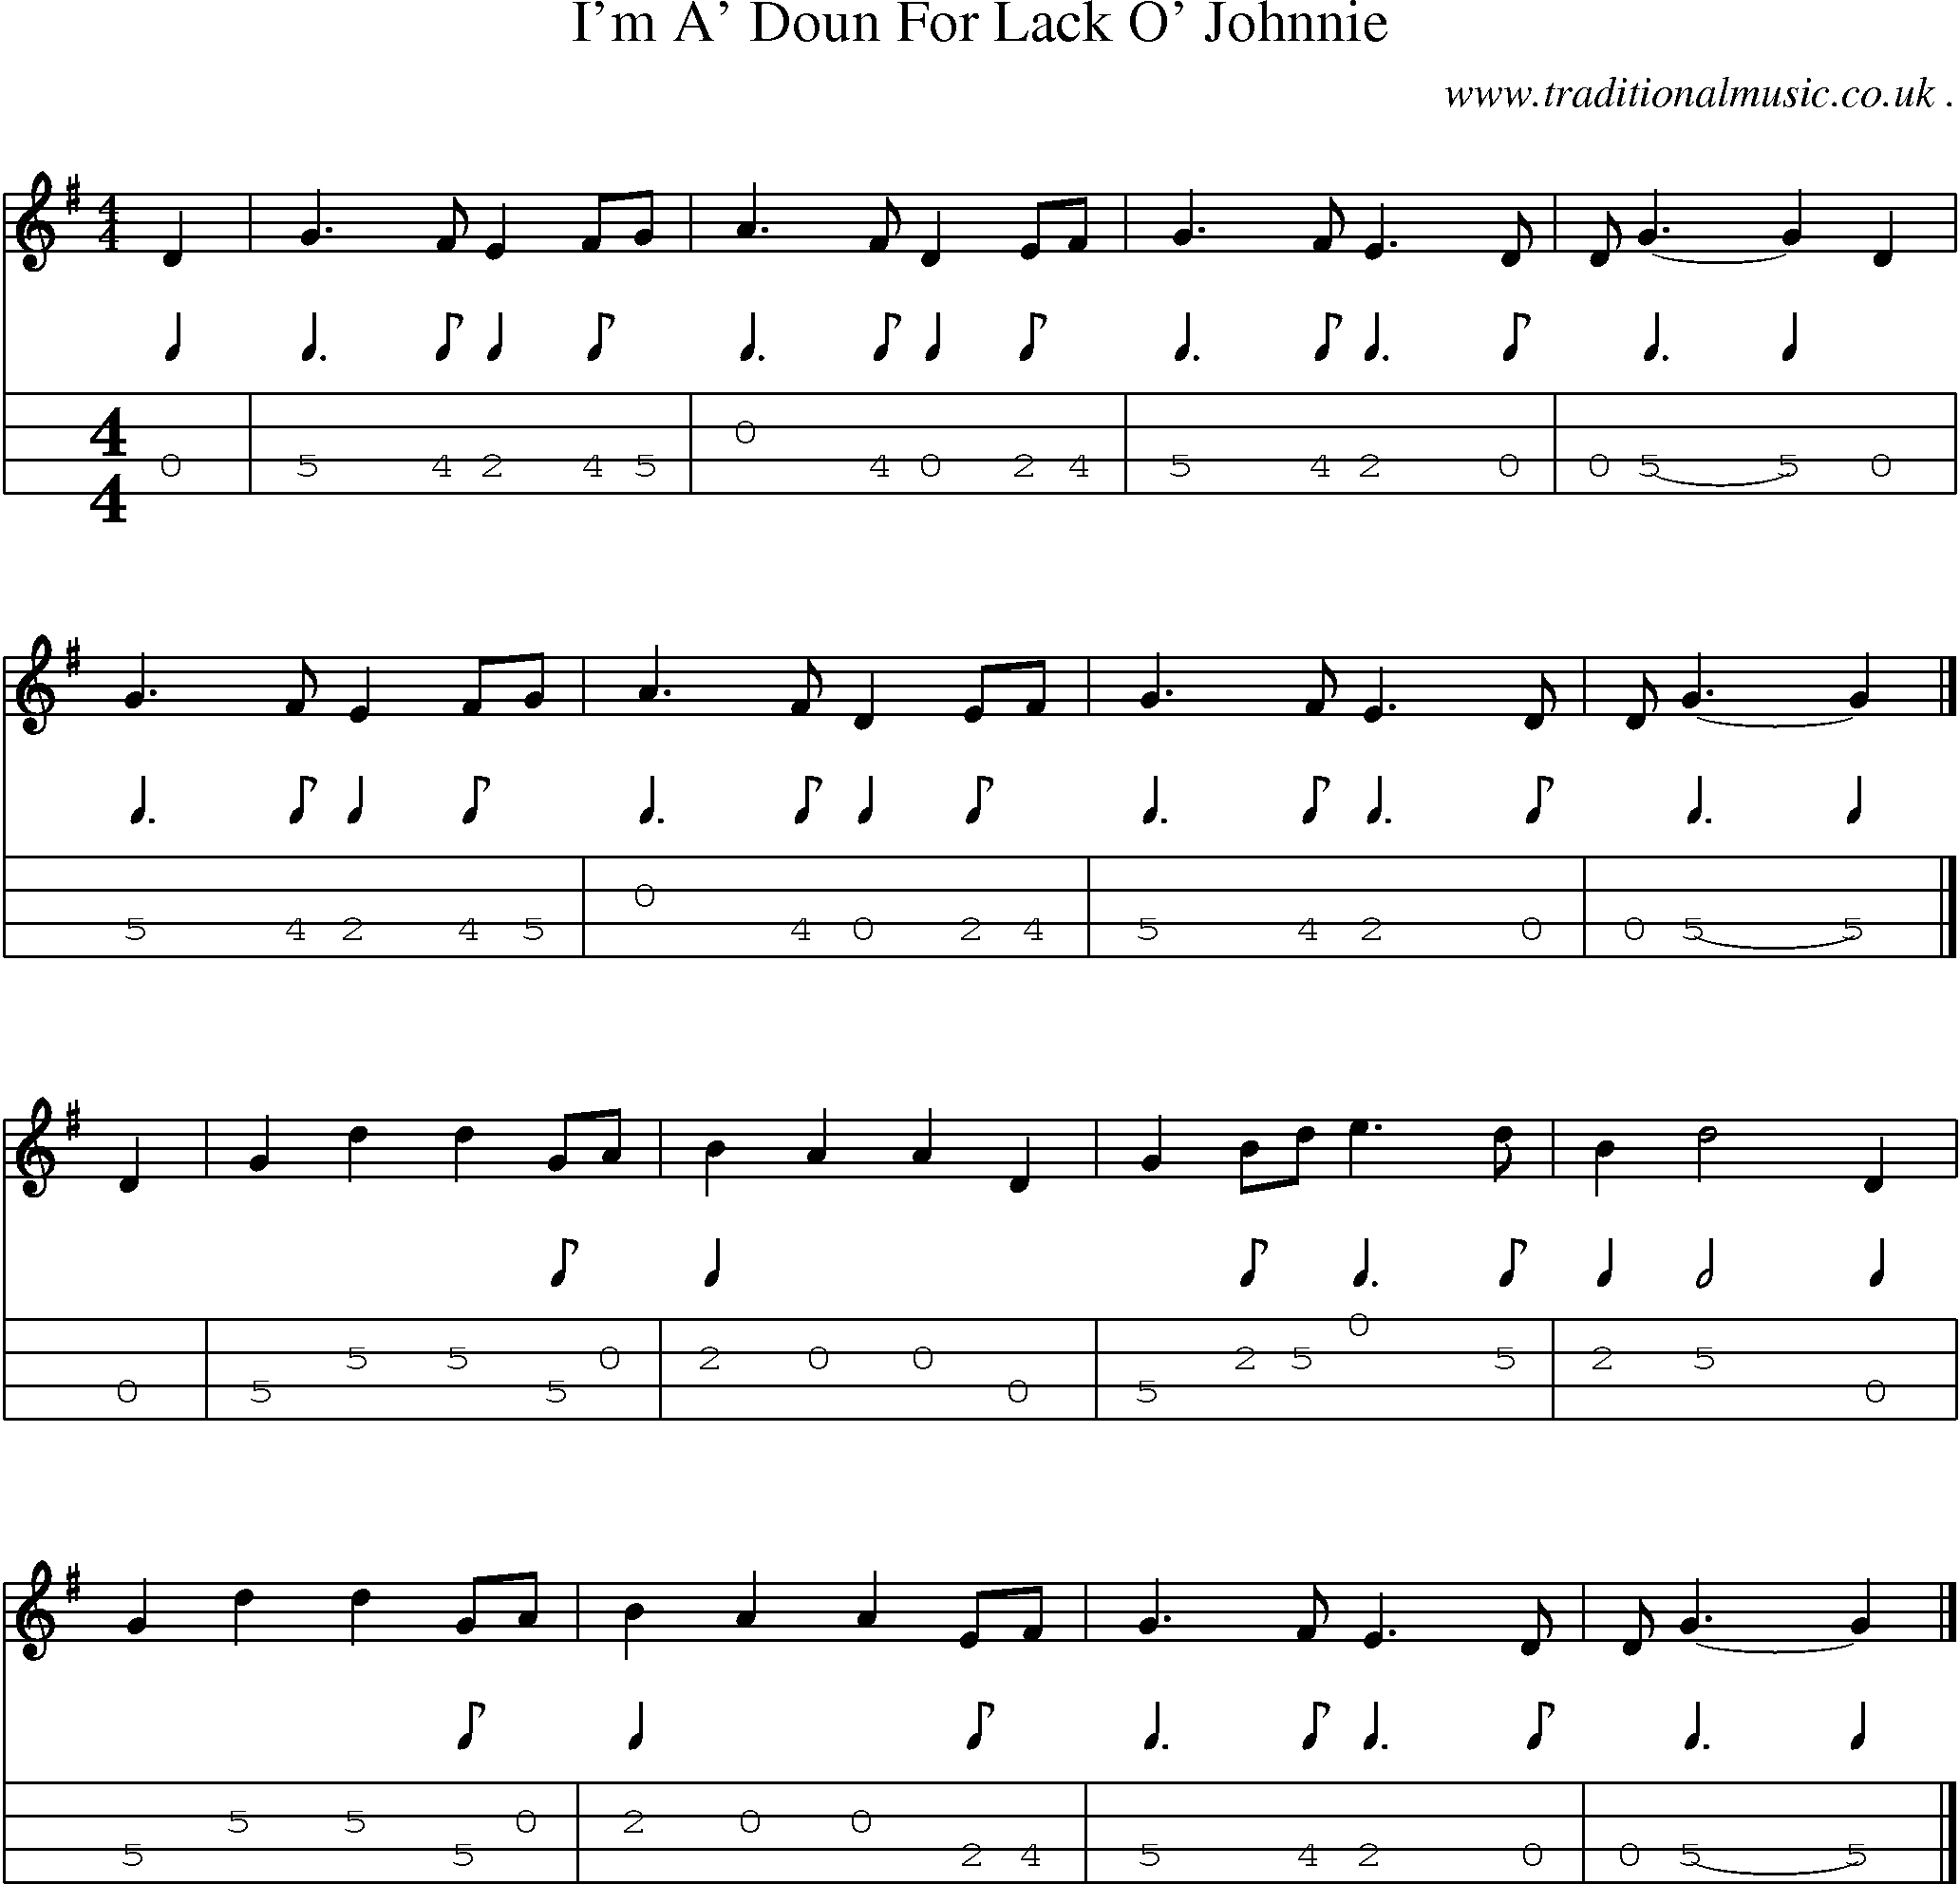 Sheet-music  score, Chords and Mandolin Tabs for Im A Doun For Lack O Johnnie